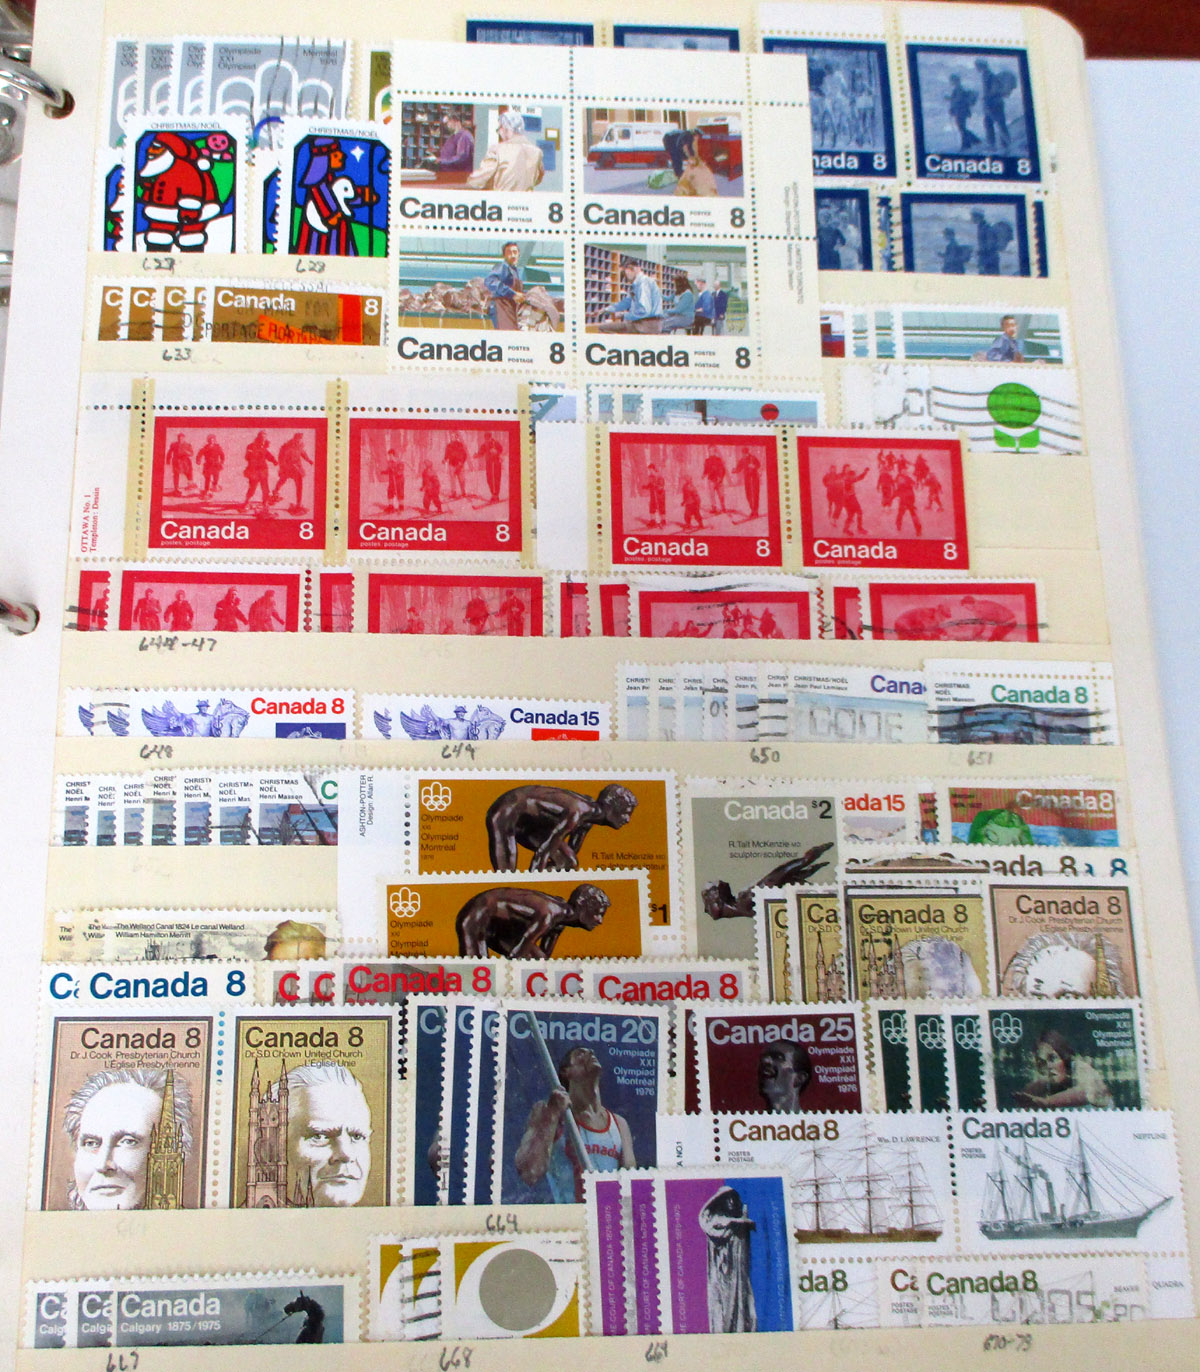 Material Archive: Stationery  Postage stamp design, Postage stamp  collecting, Stamp collection display